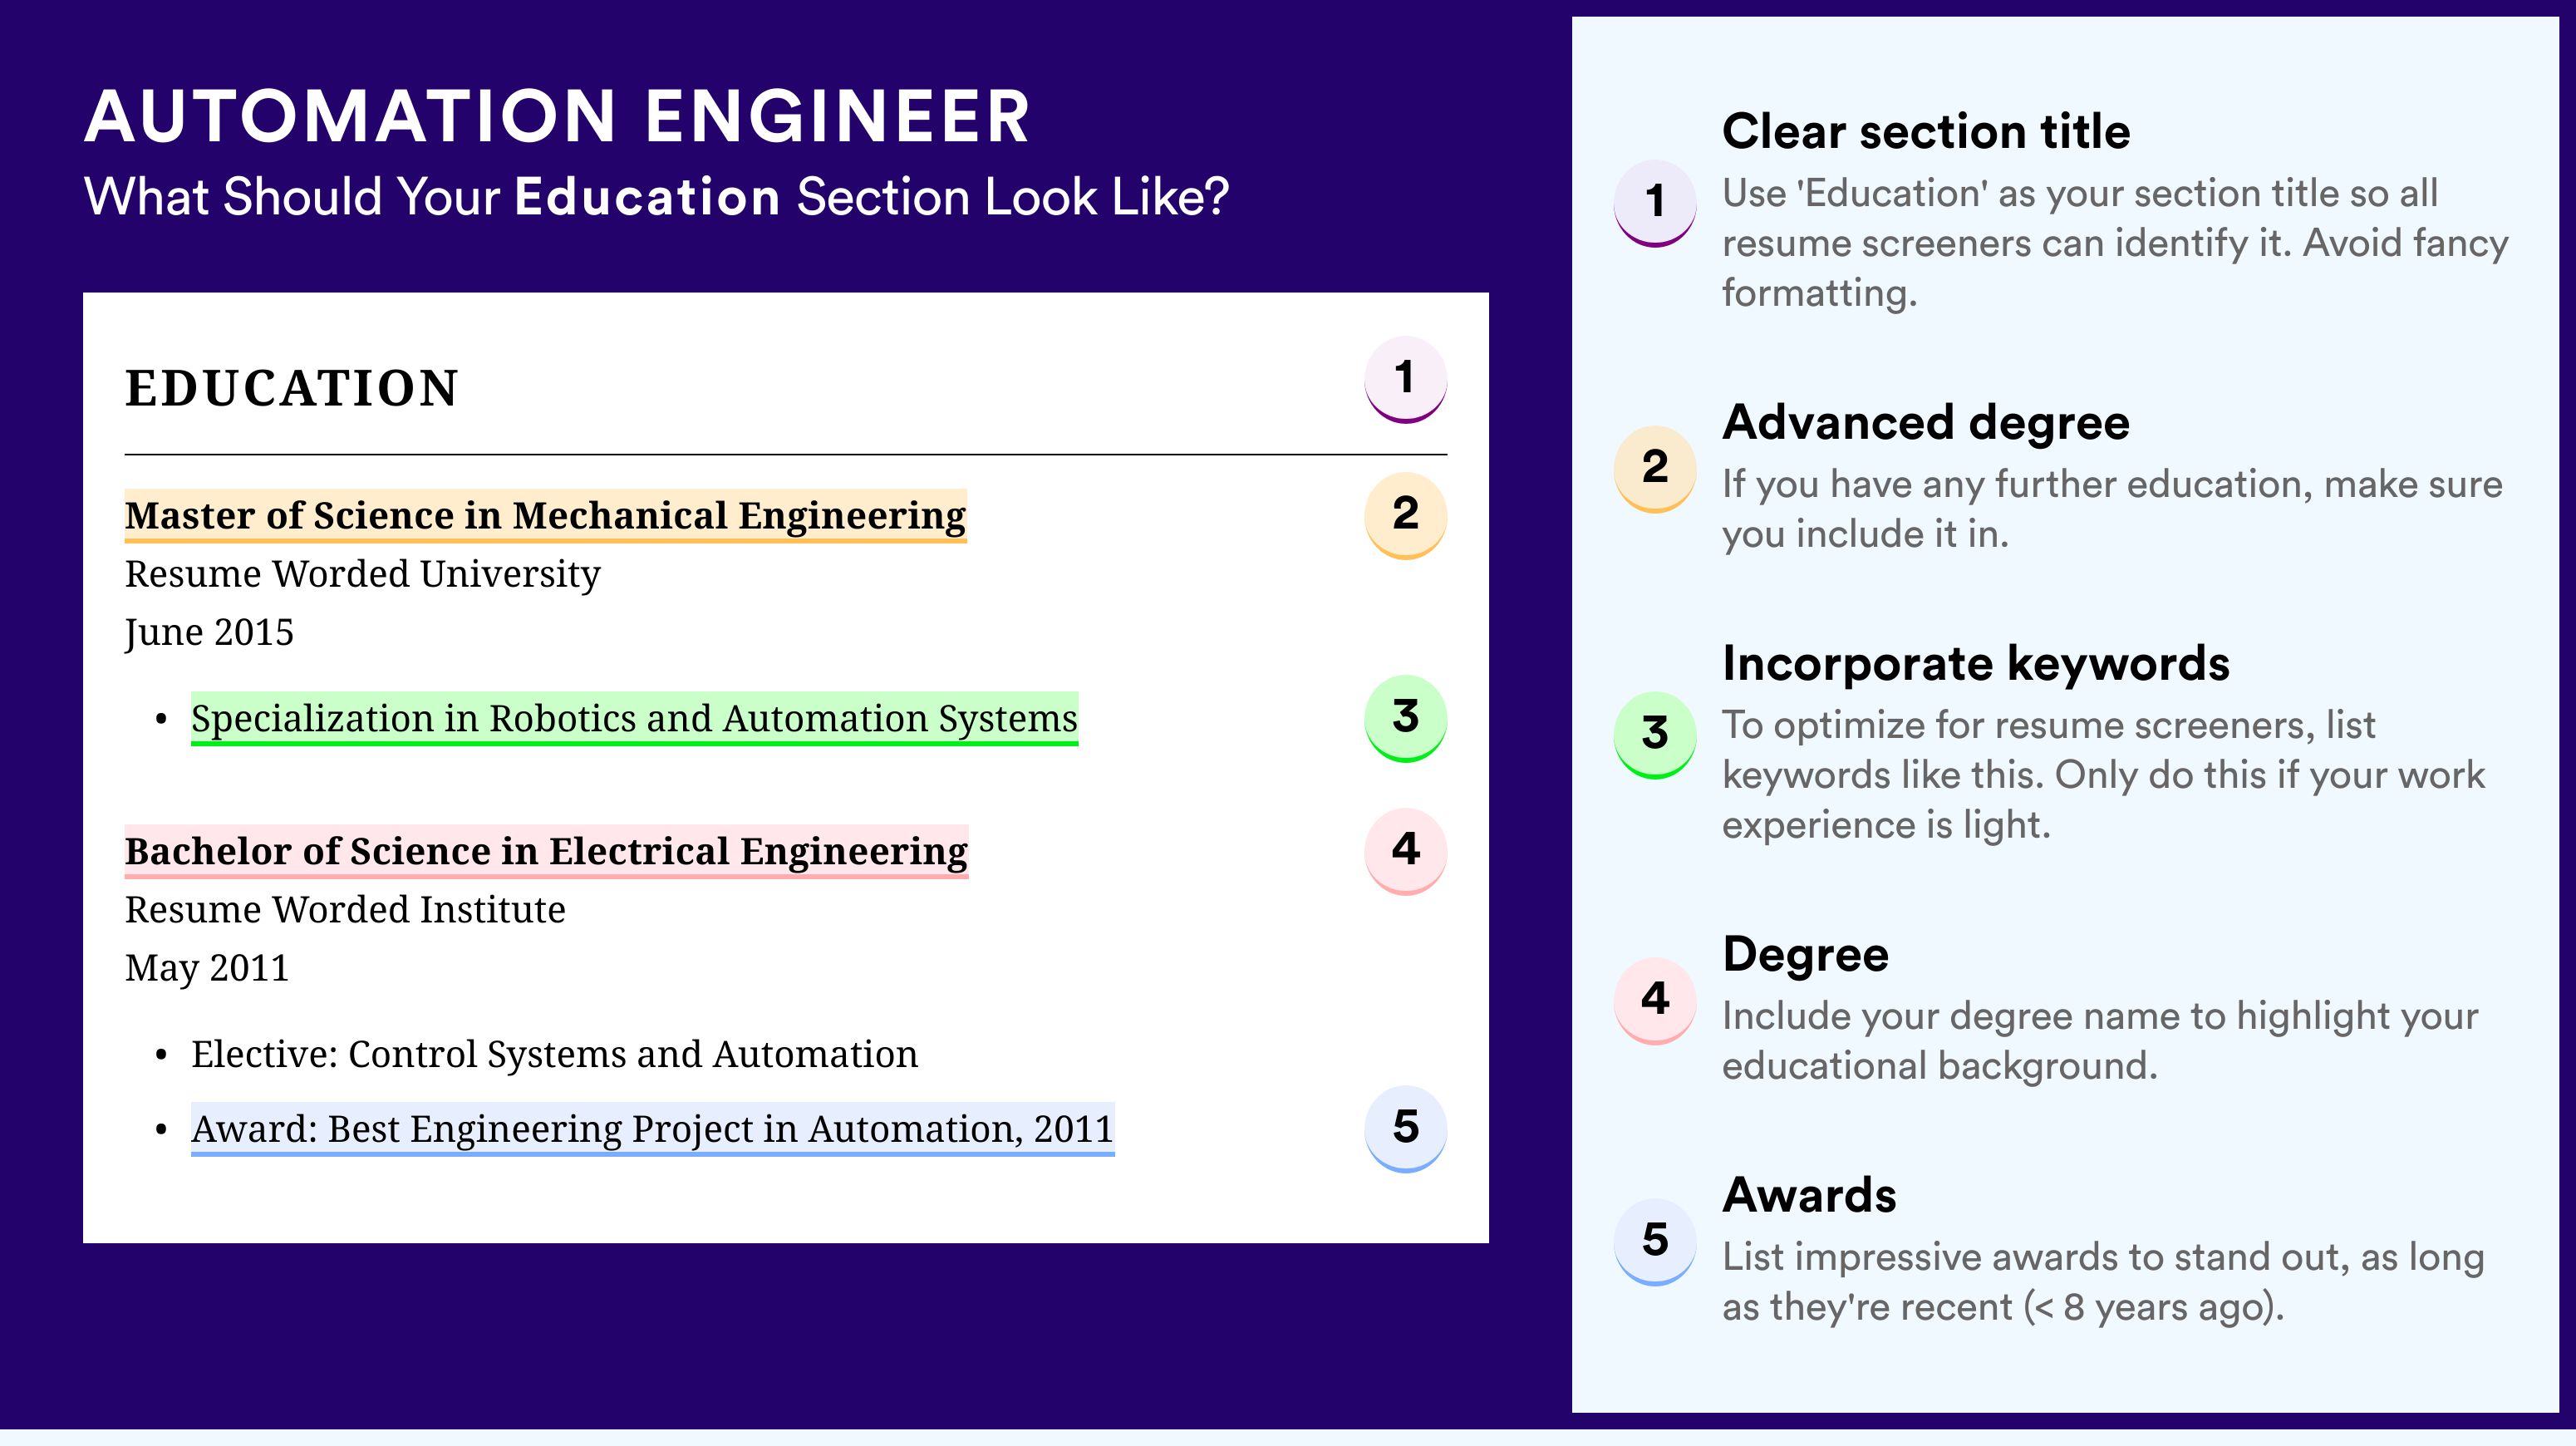 How To Write An Education Section - Automation Engineer Roles